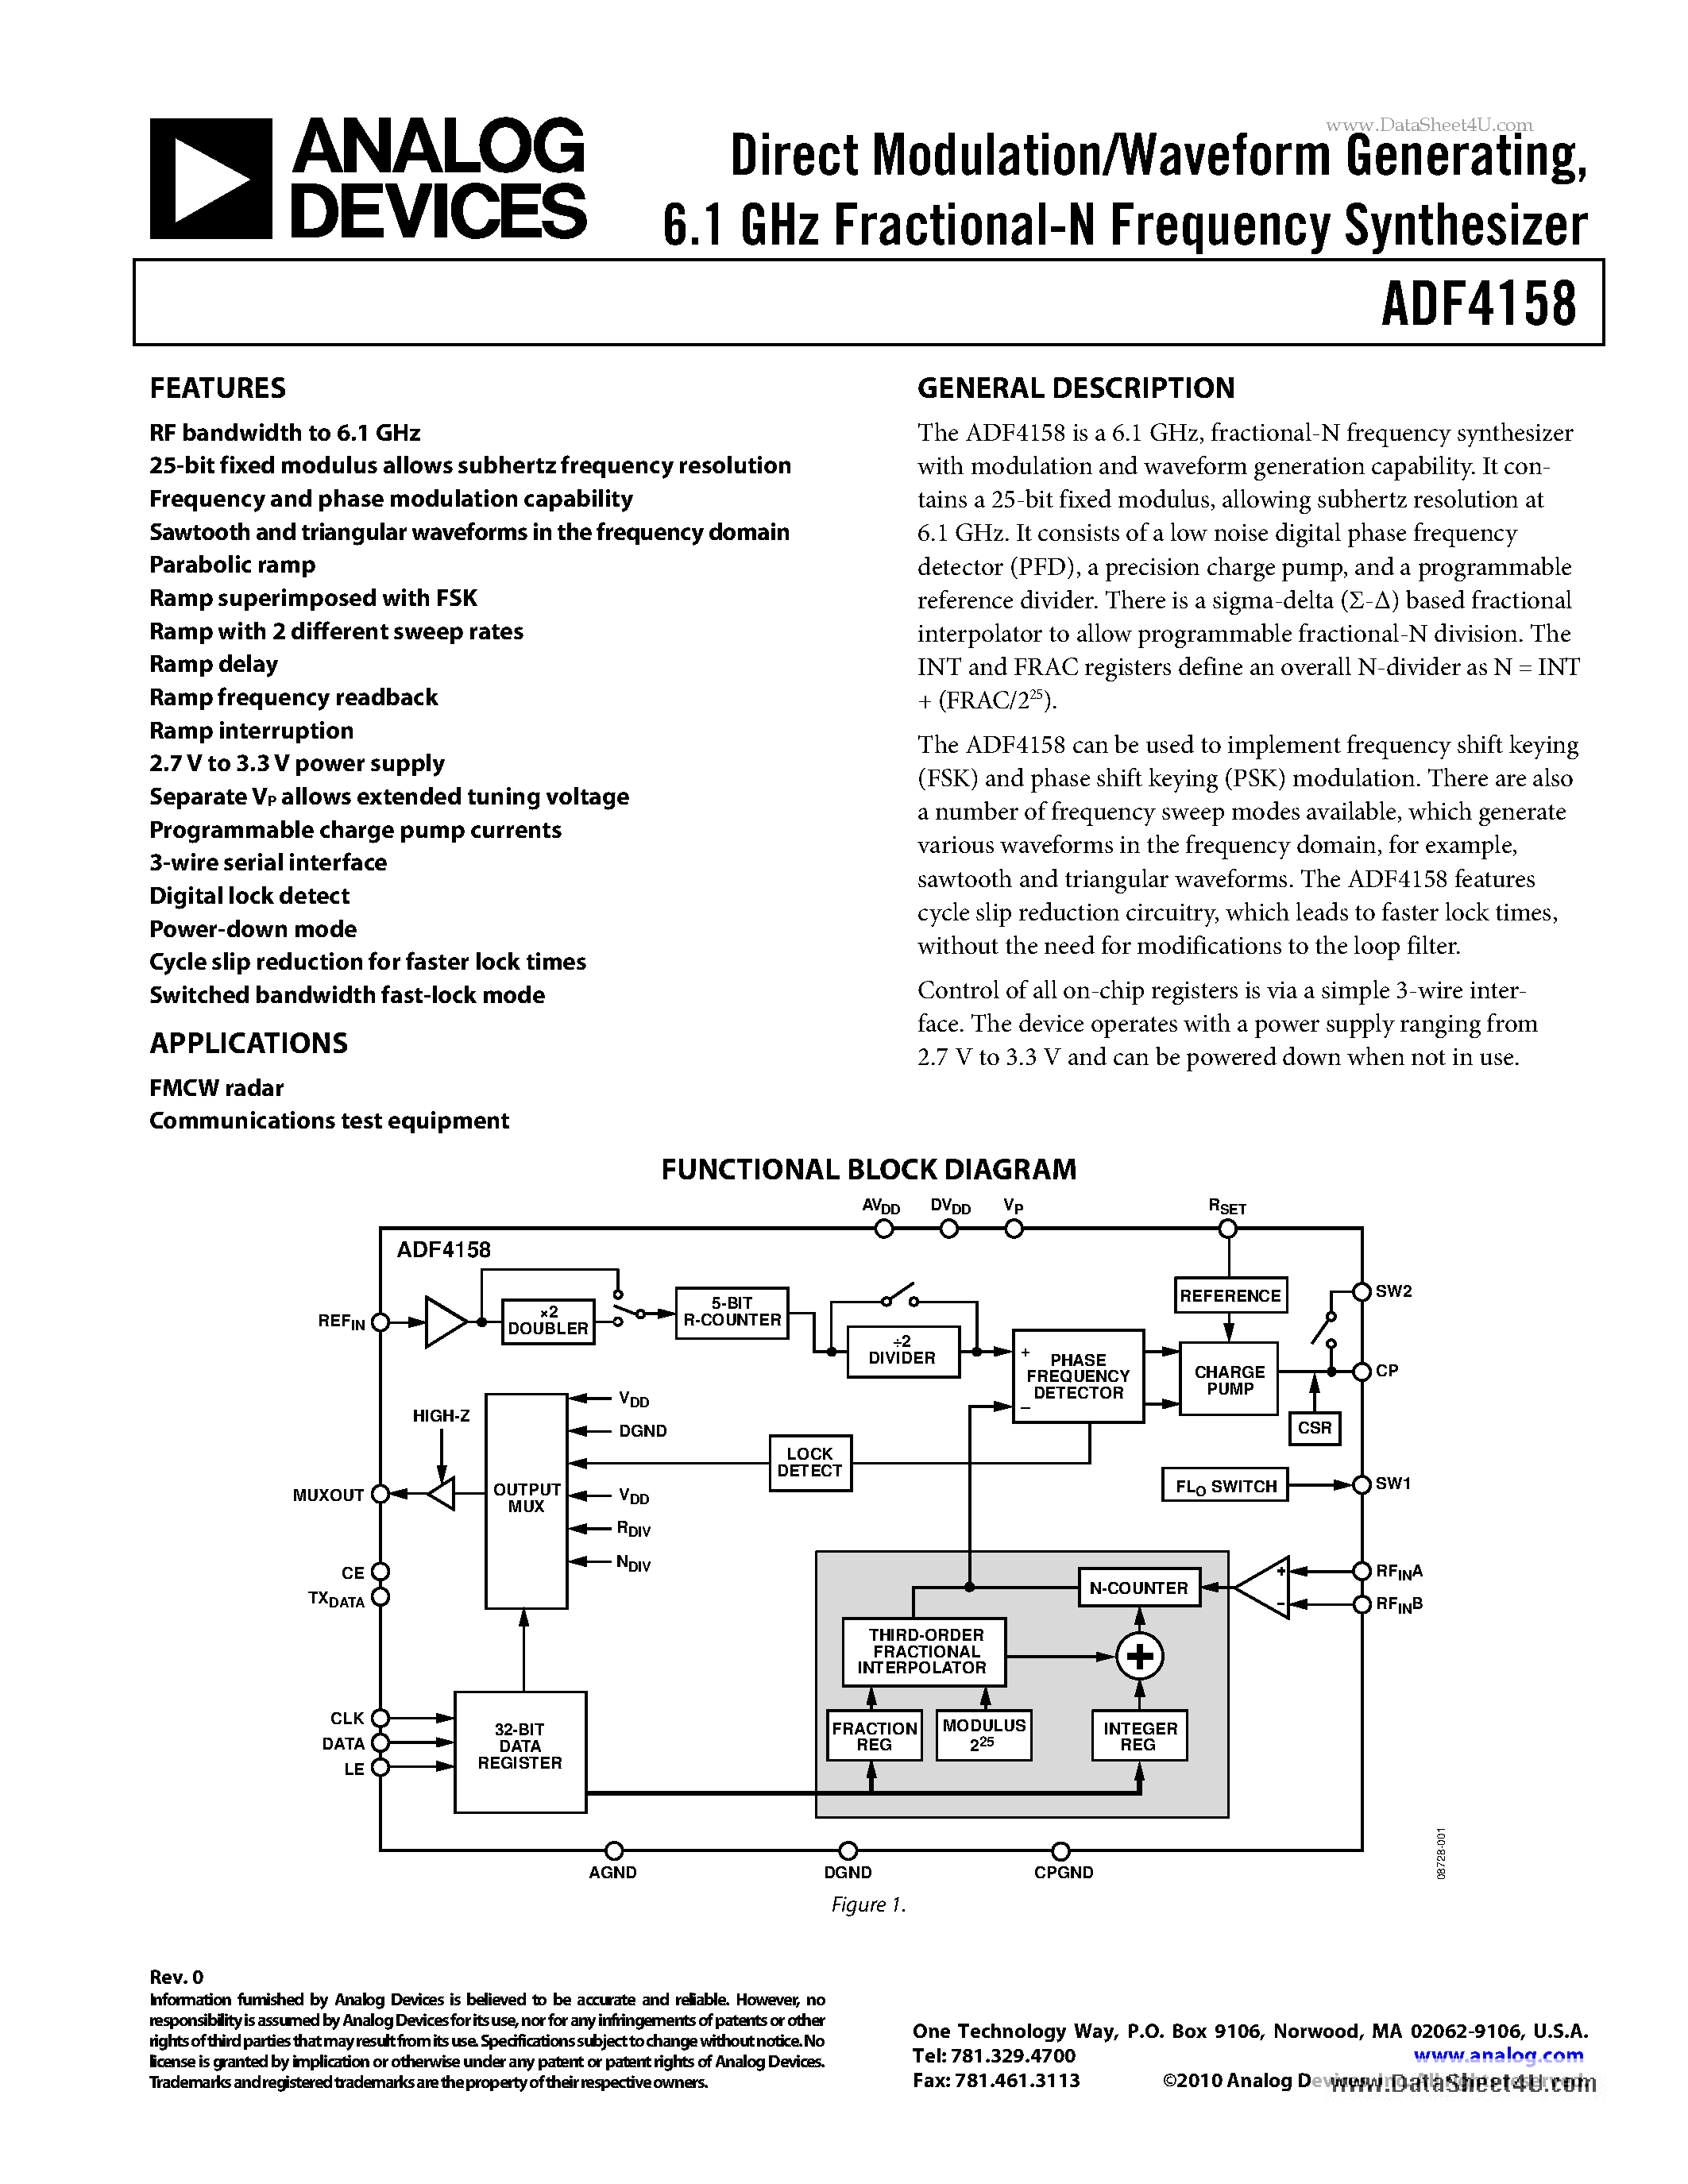 Datasheet ADF4158 - Direct Modulation/Waveform Generating 6.1 GHz Fractional-N Frequency Synthesizer page 1